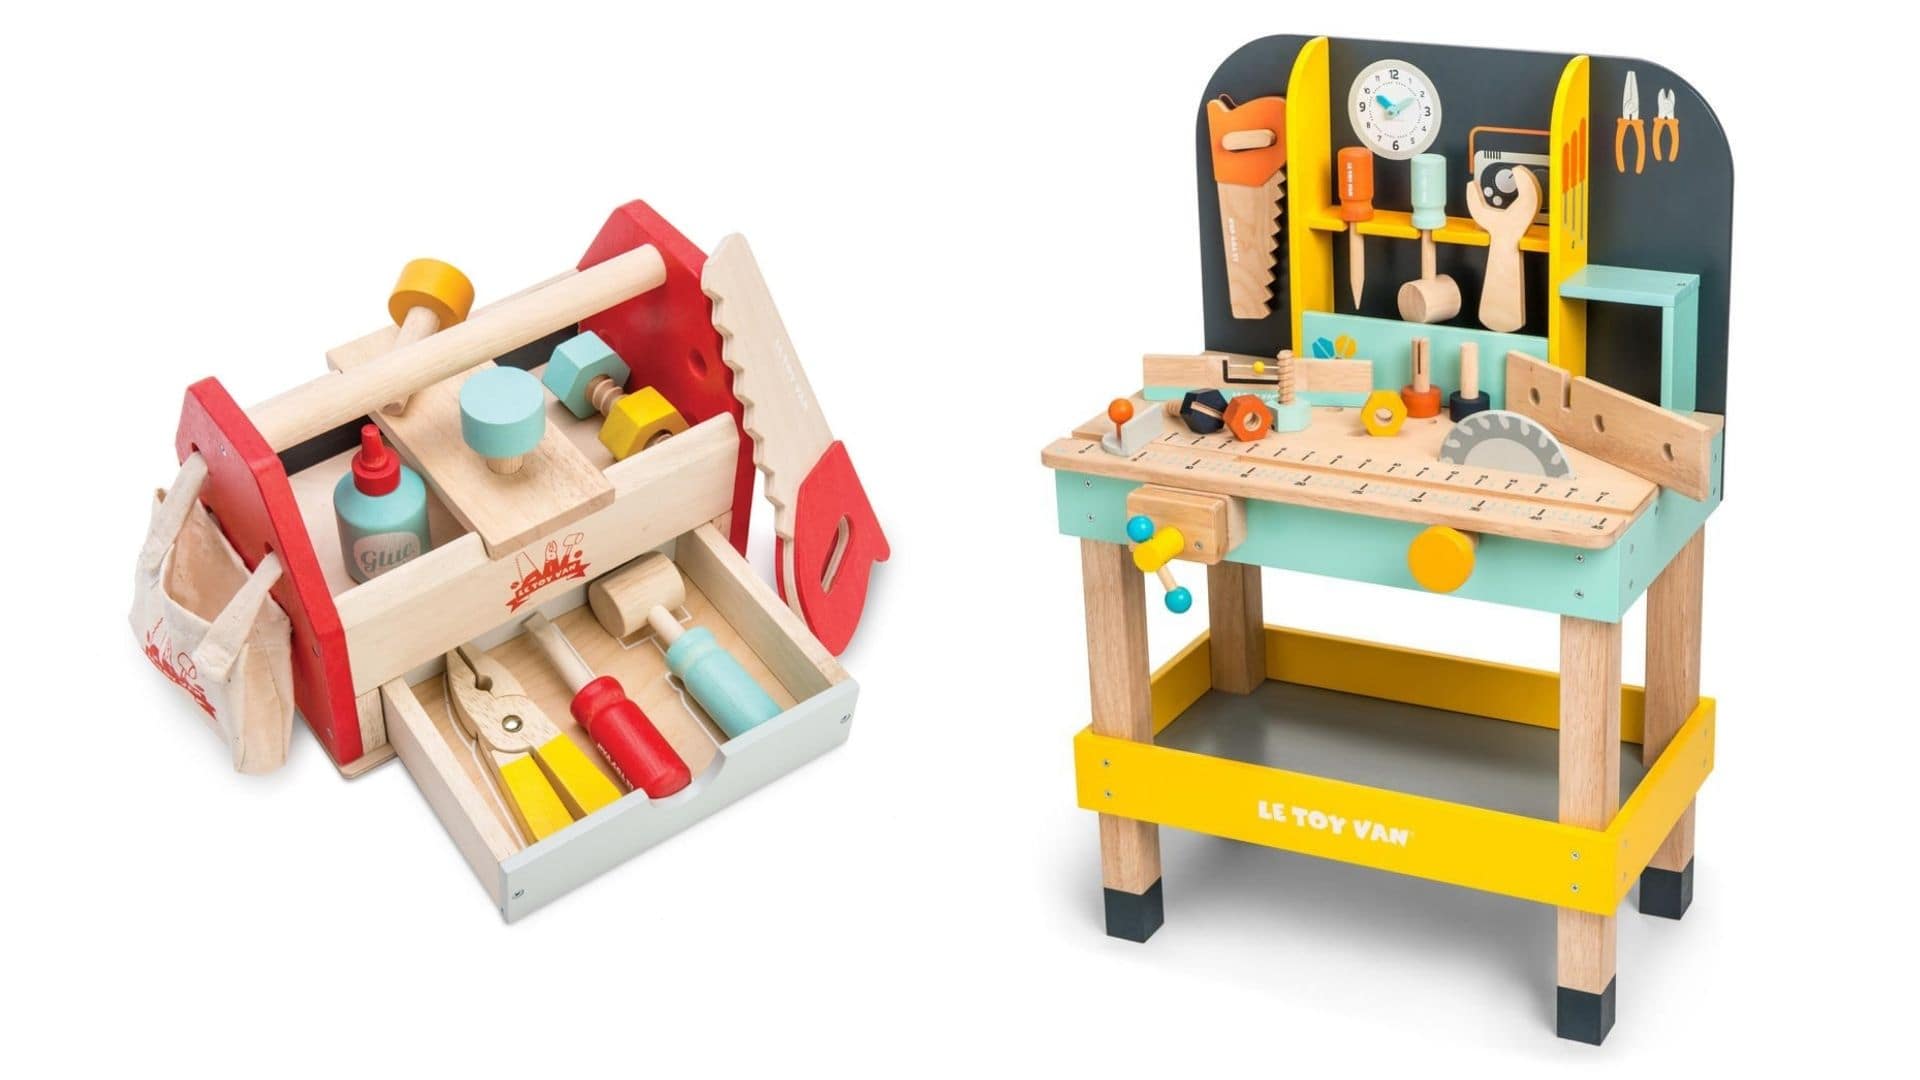 A wooden carpenter's tool set and a wooden builder's bench full of toy tools.